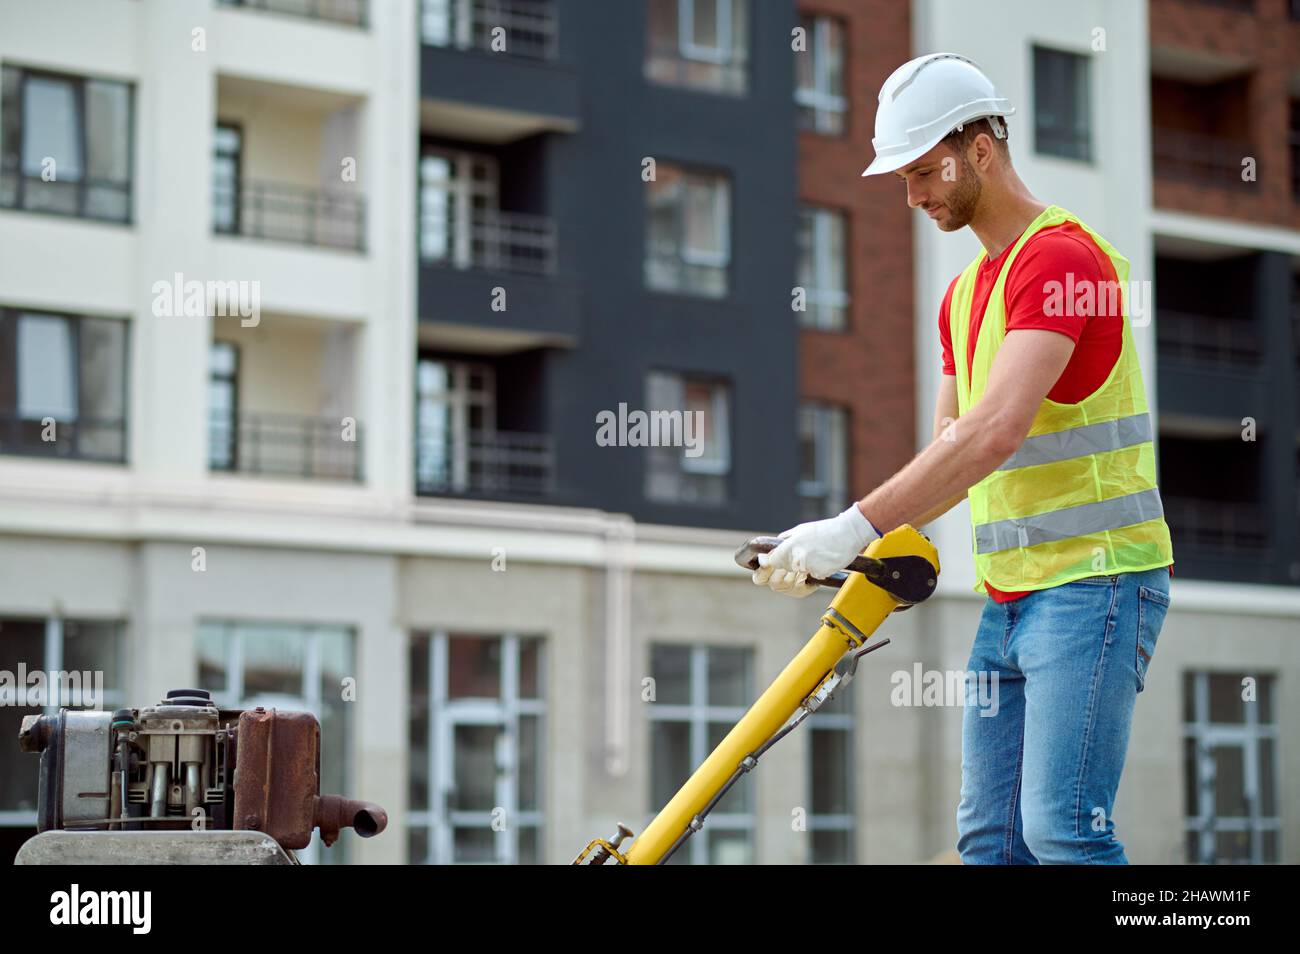 Profile of man with construction equipment Stock Photo